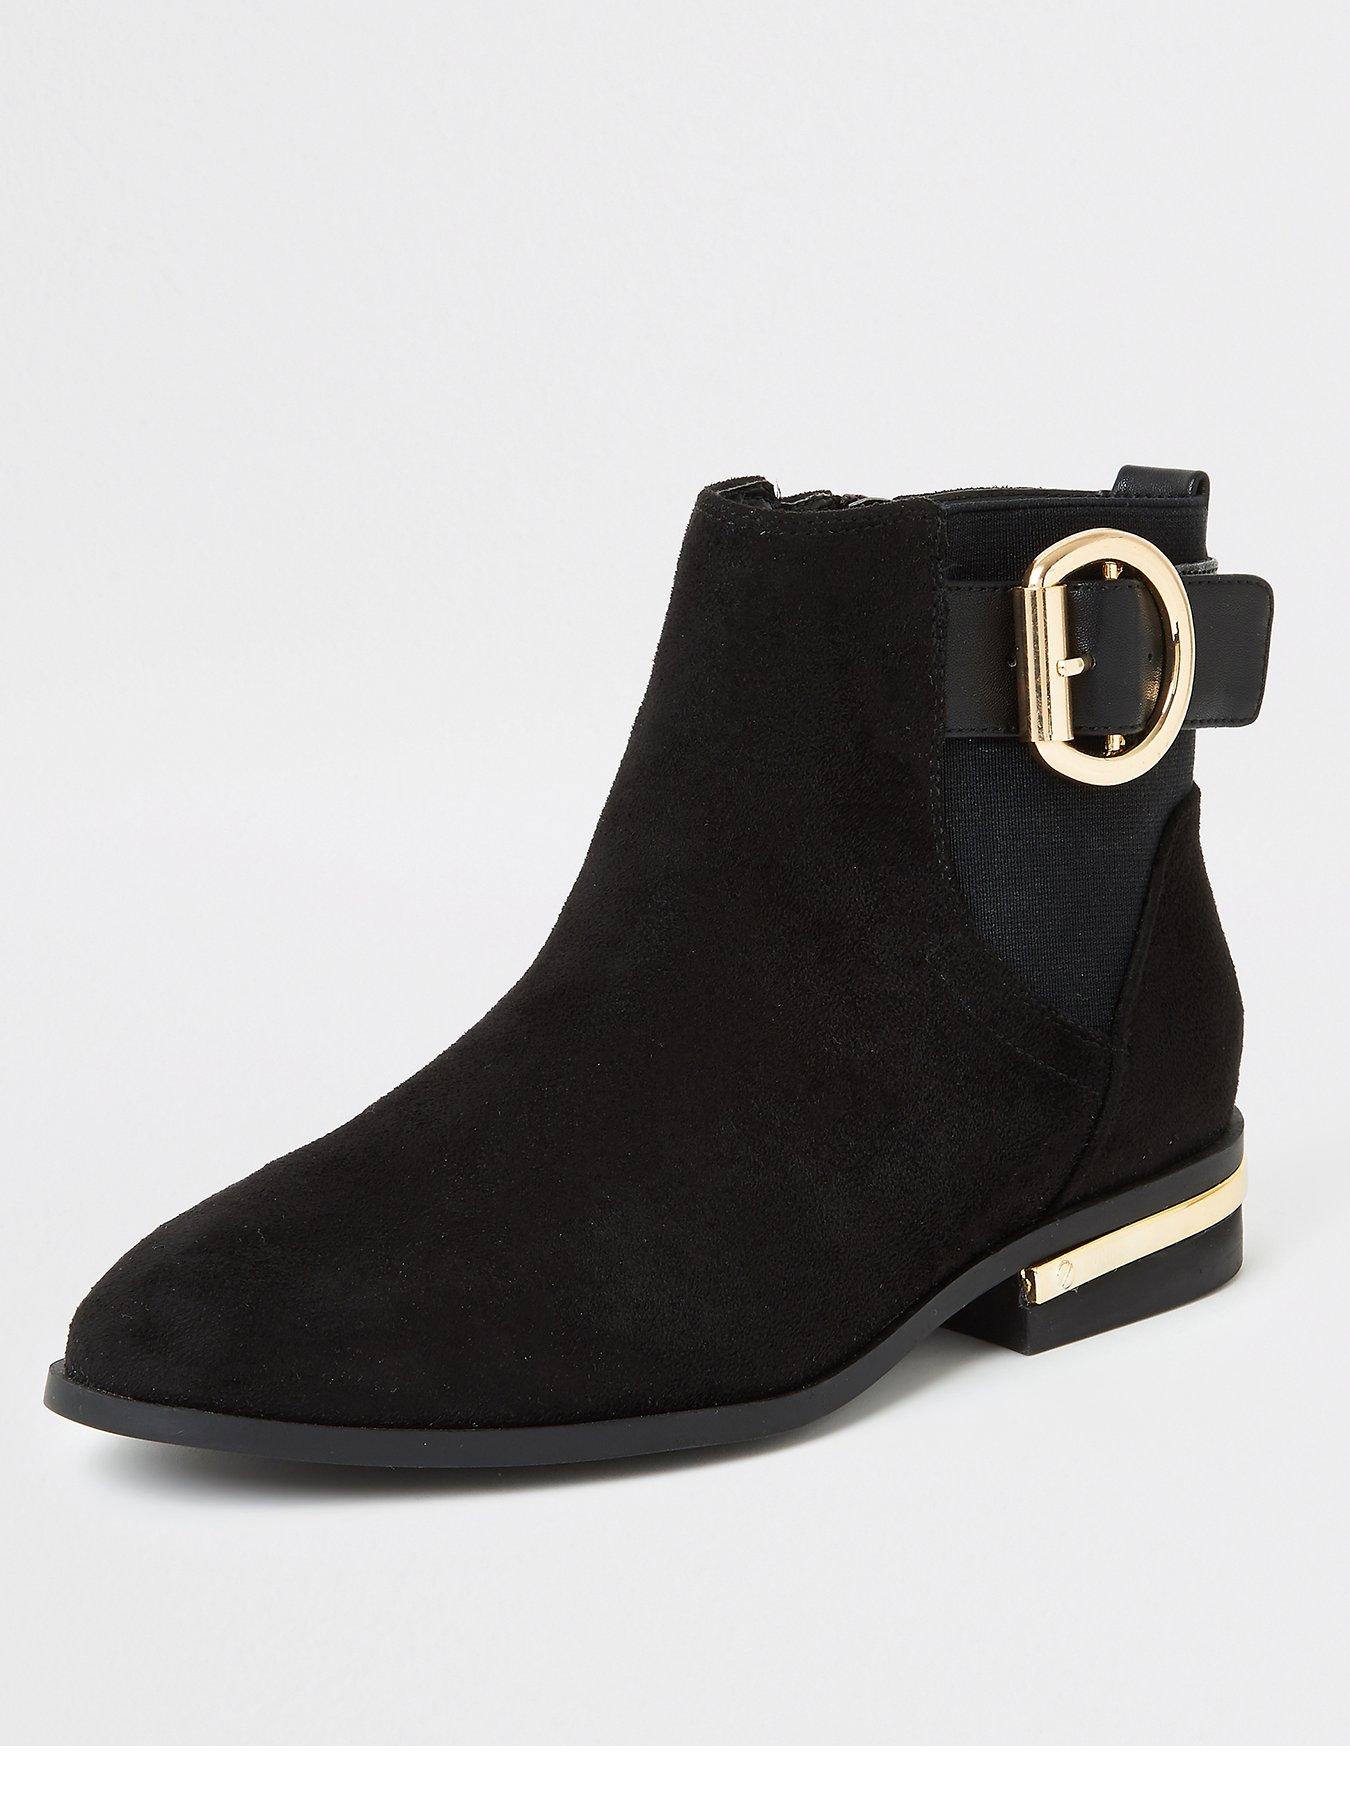 flat suede ankle boots uk